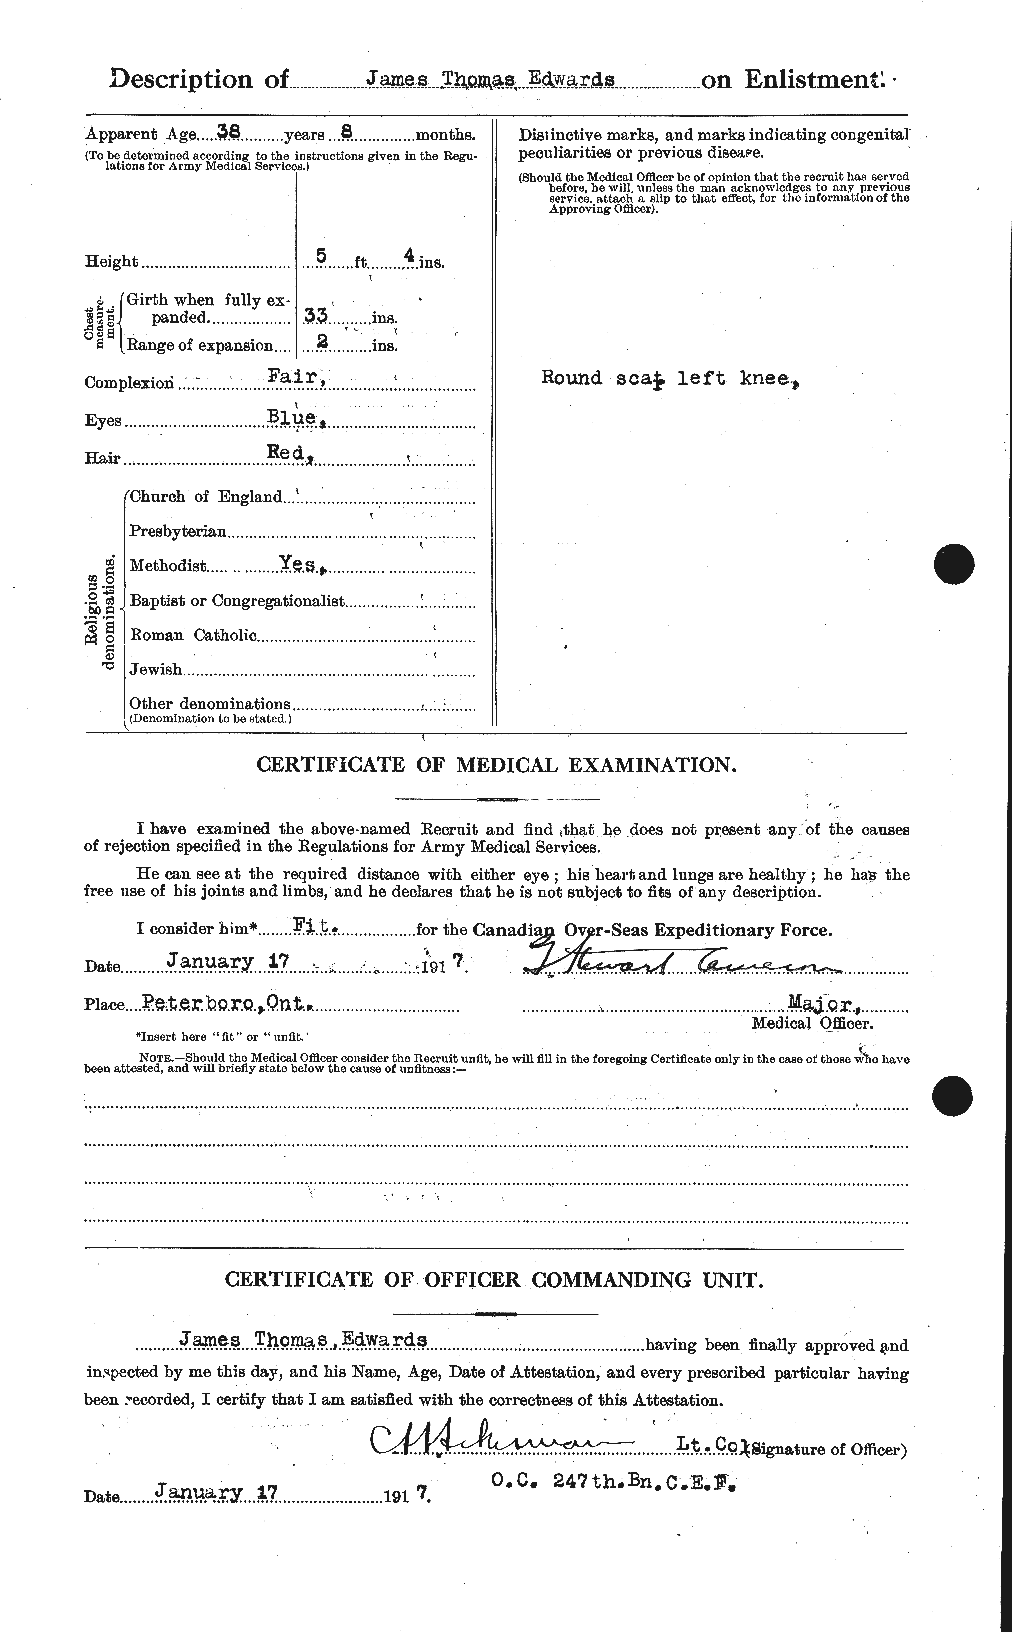 Personnel Records of the First World War - CEF 309823b